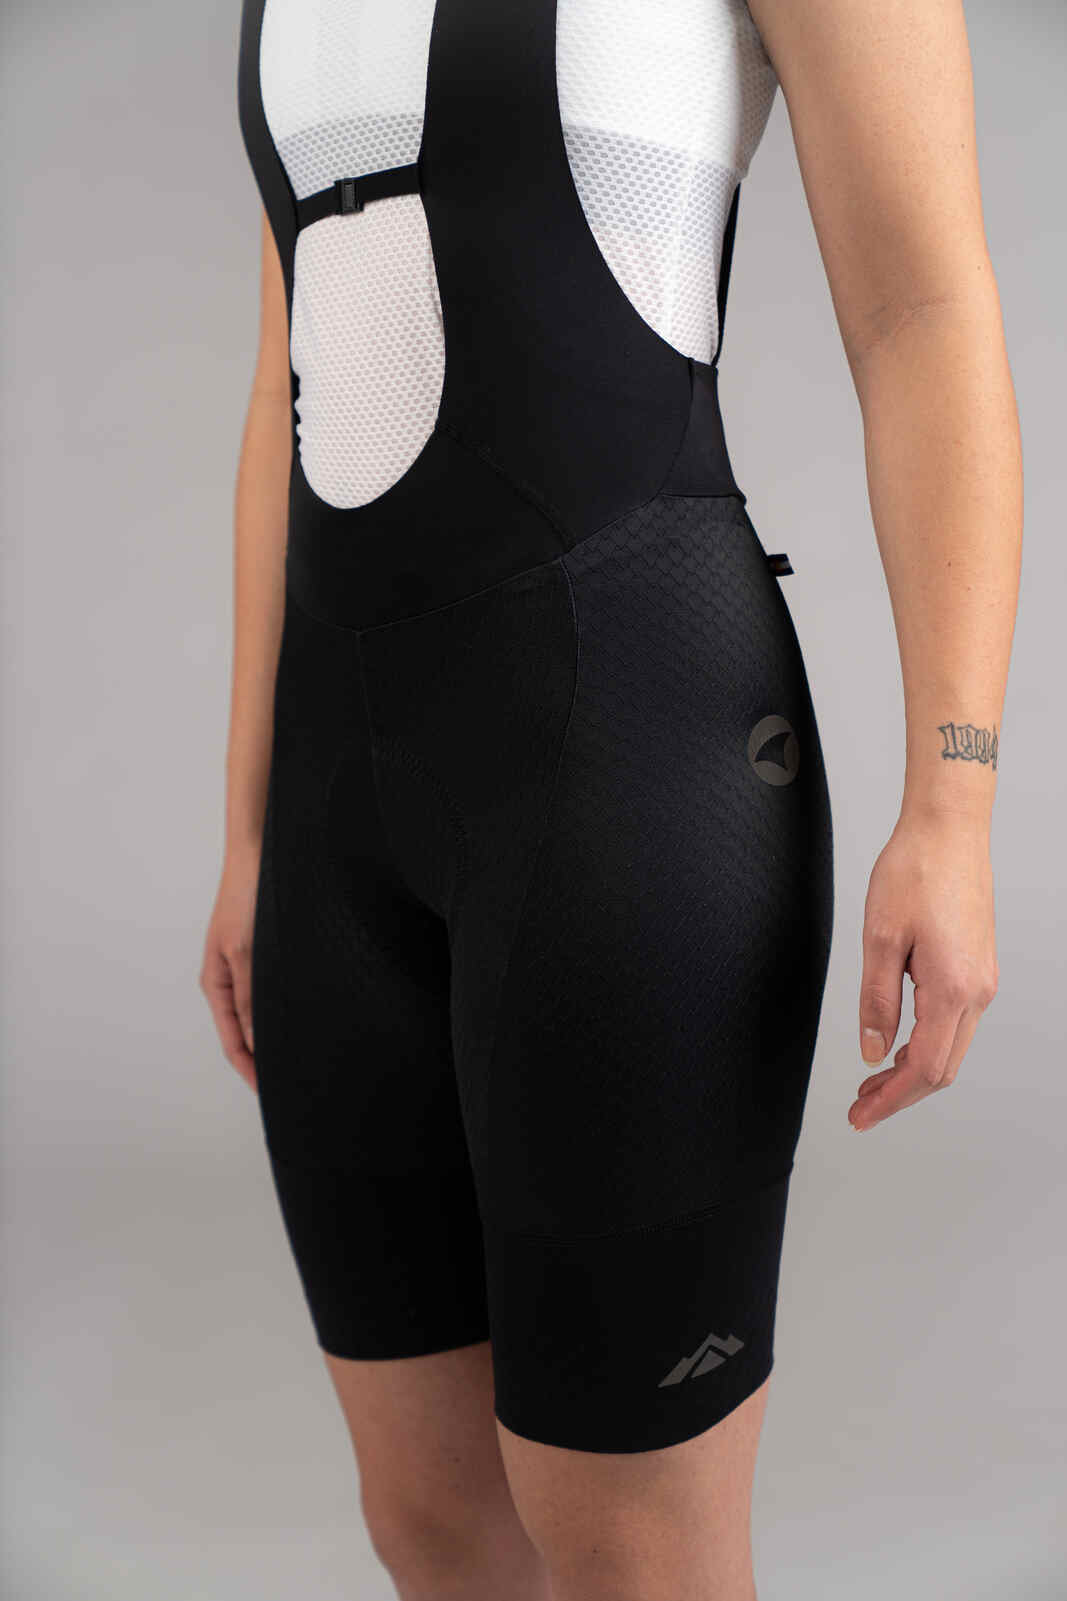 Women's Compression Cycling Bibs - Side View